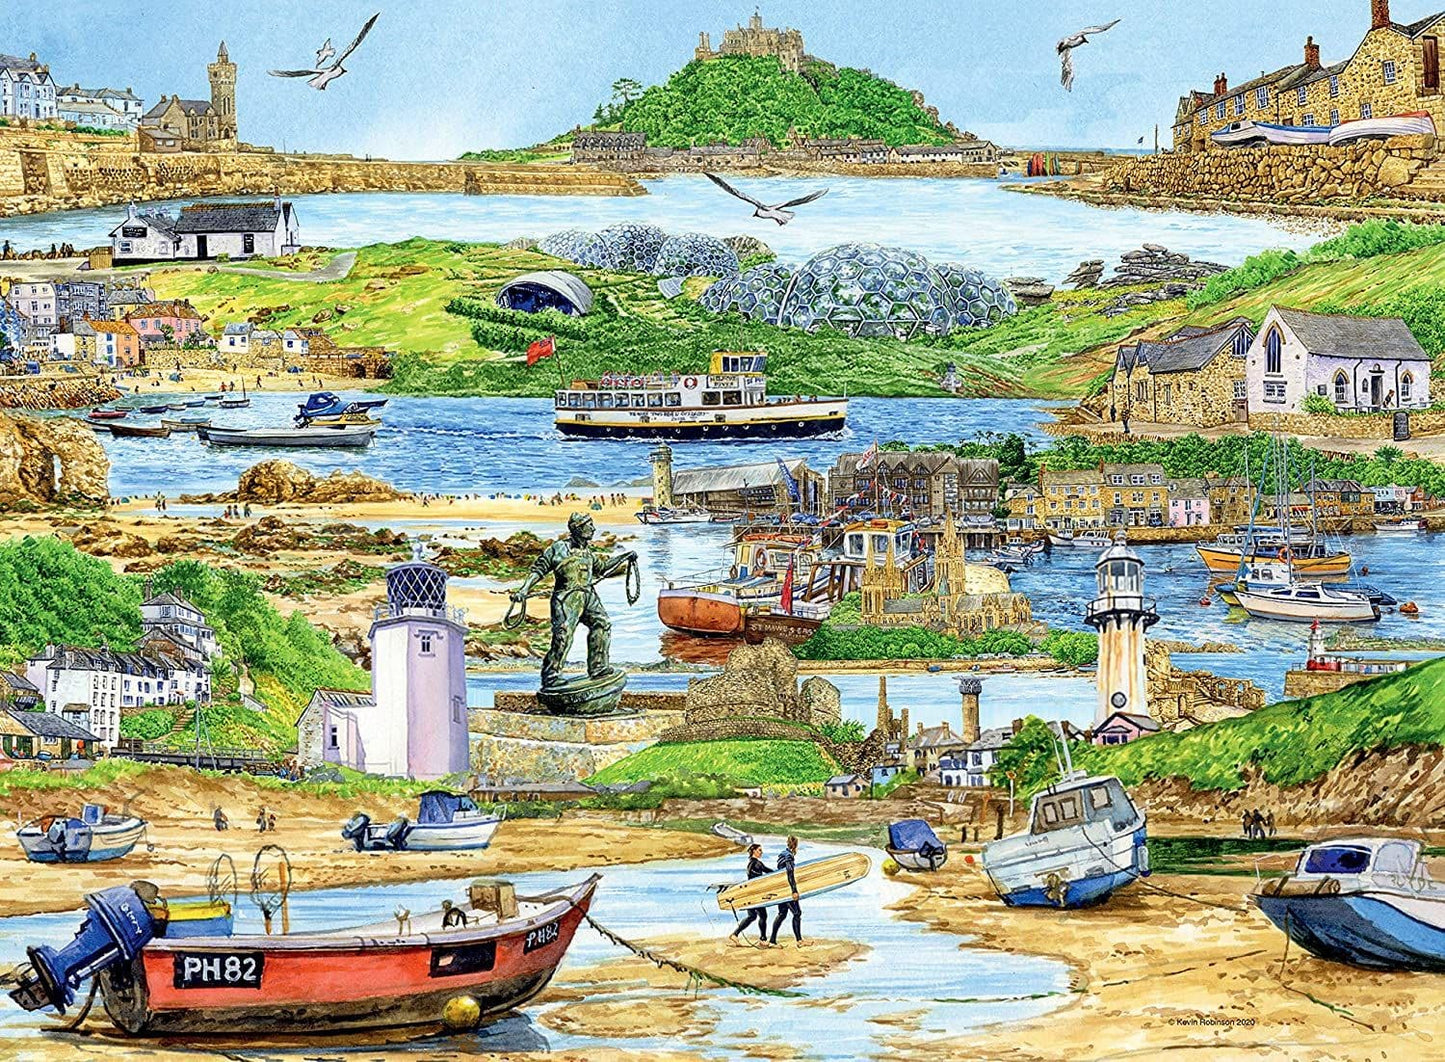 Ravensburger - Escape to Cornwall- 500 Piece Jigsaw Puzzle